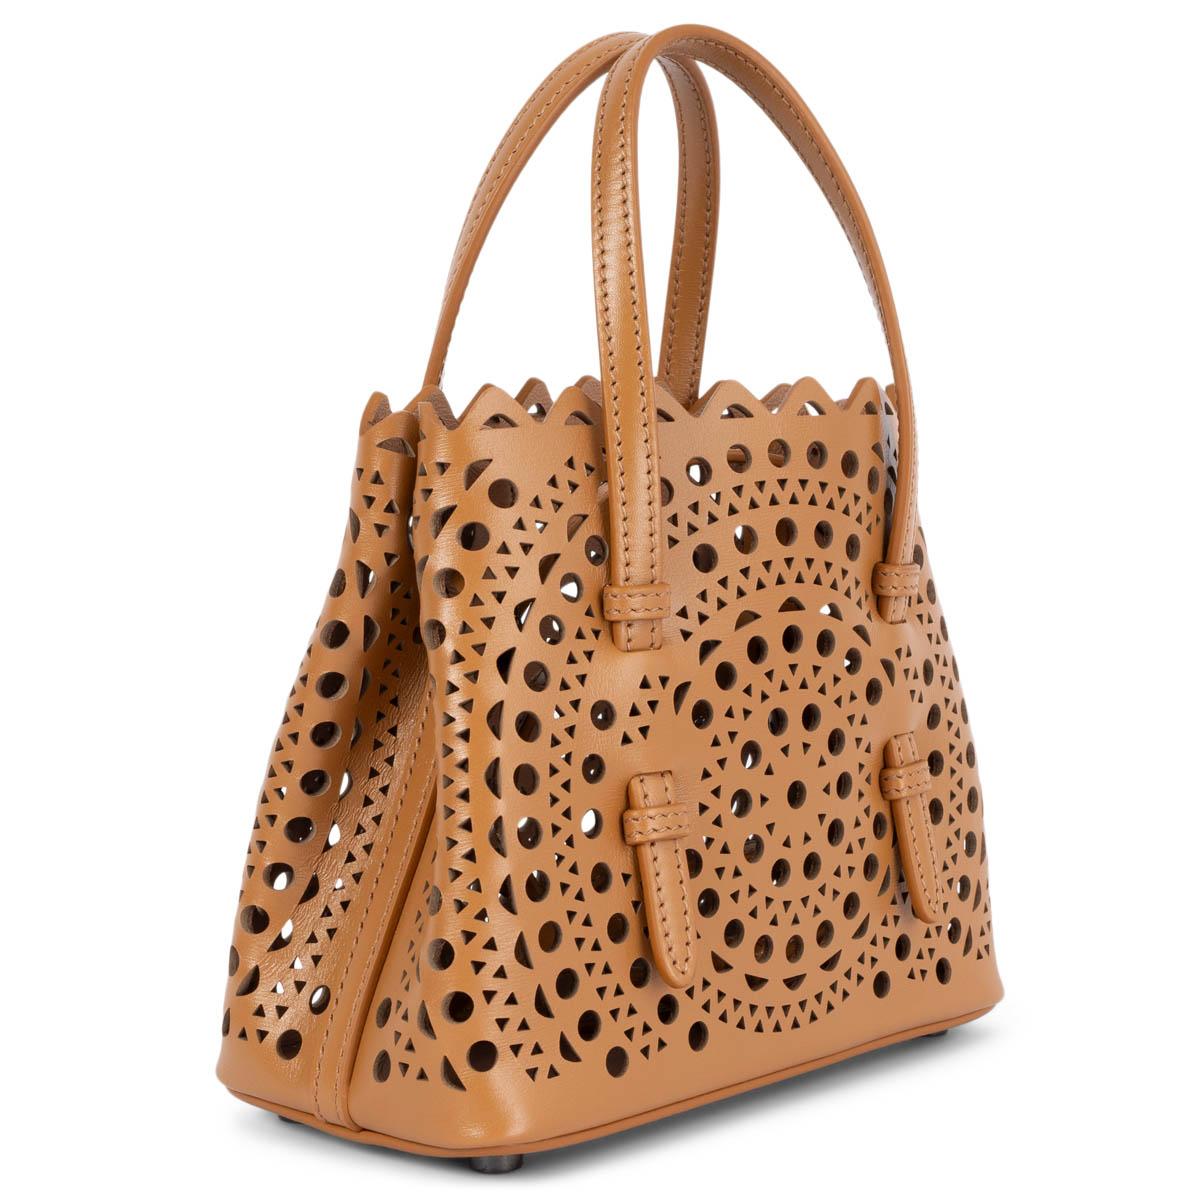 100% authentic Alaïa Mina 16 micro tote bag in tan brown Vienne Wave calfskin leather. The Vienne pattern is inspired by precious lace and moucharabieh architectural openwork. Features double handles, snap-fastening gusseted sides that expand and a